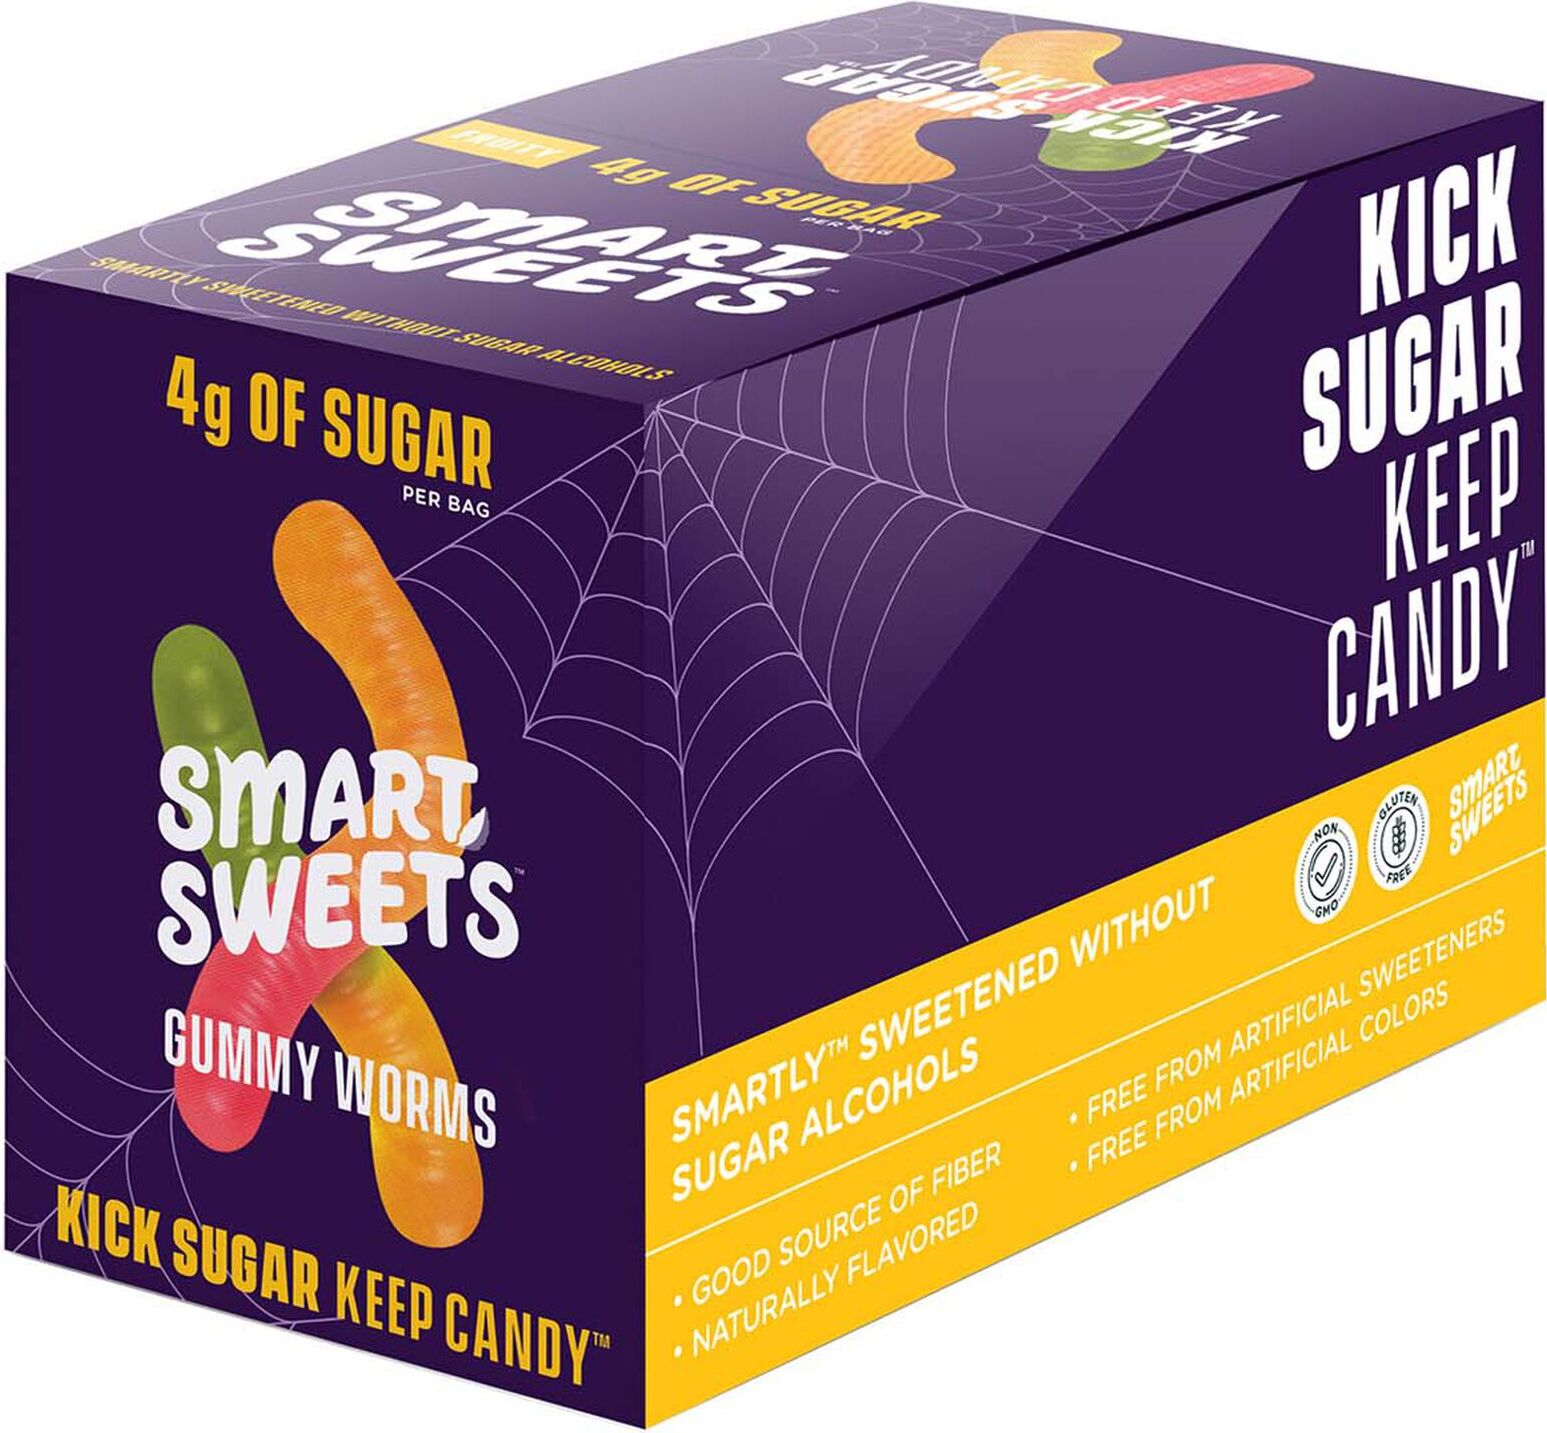 Smart Sweets | News, Reviews, & Prices at PricePlow